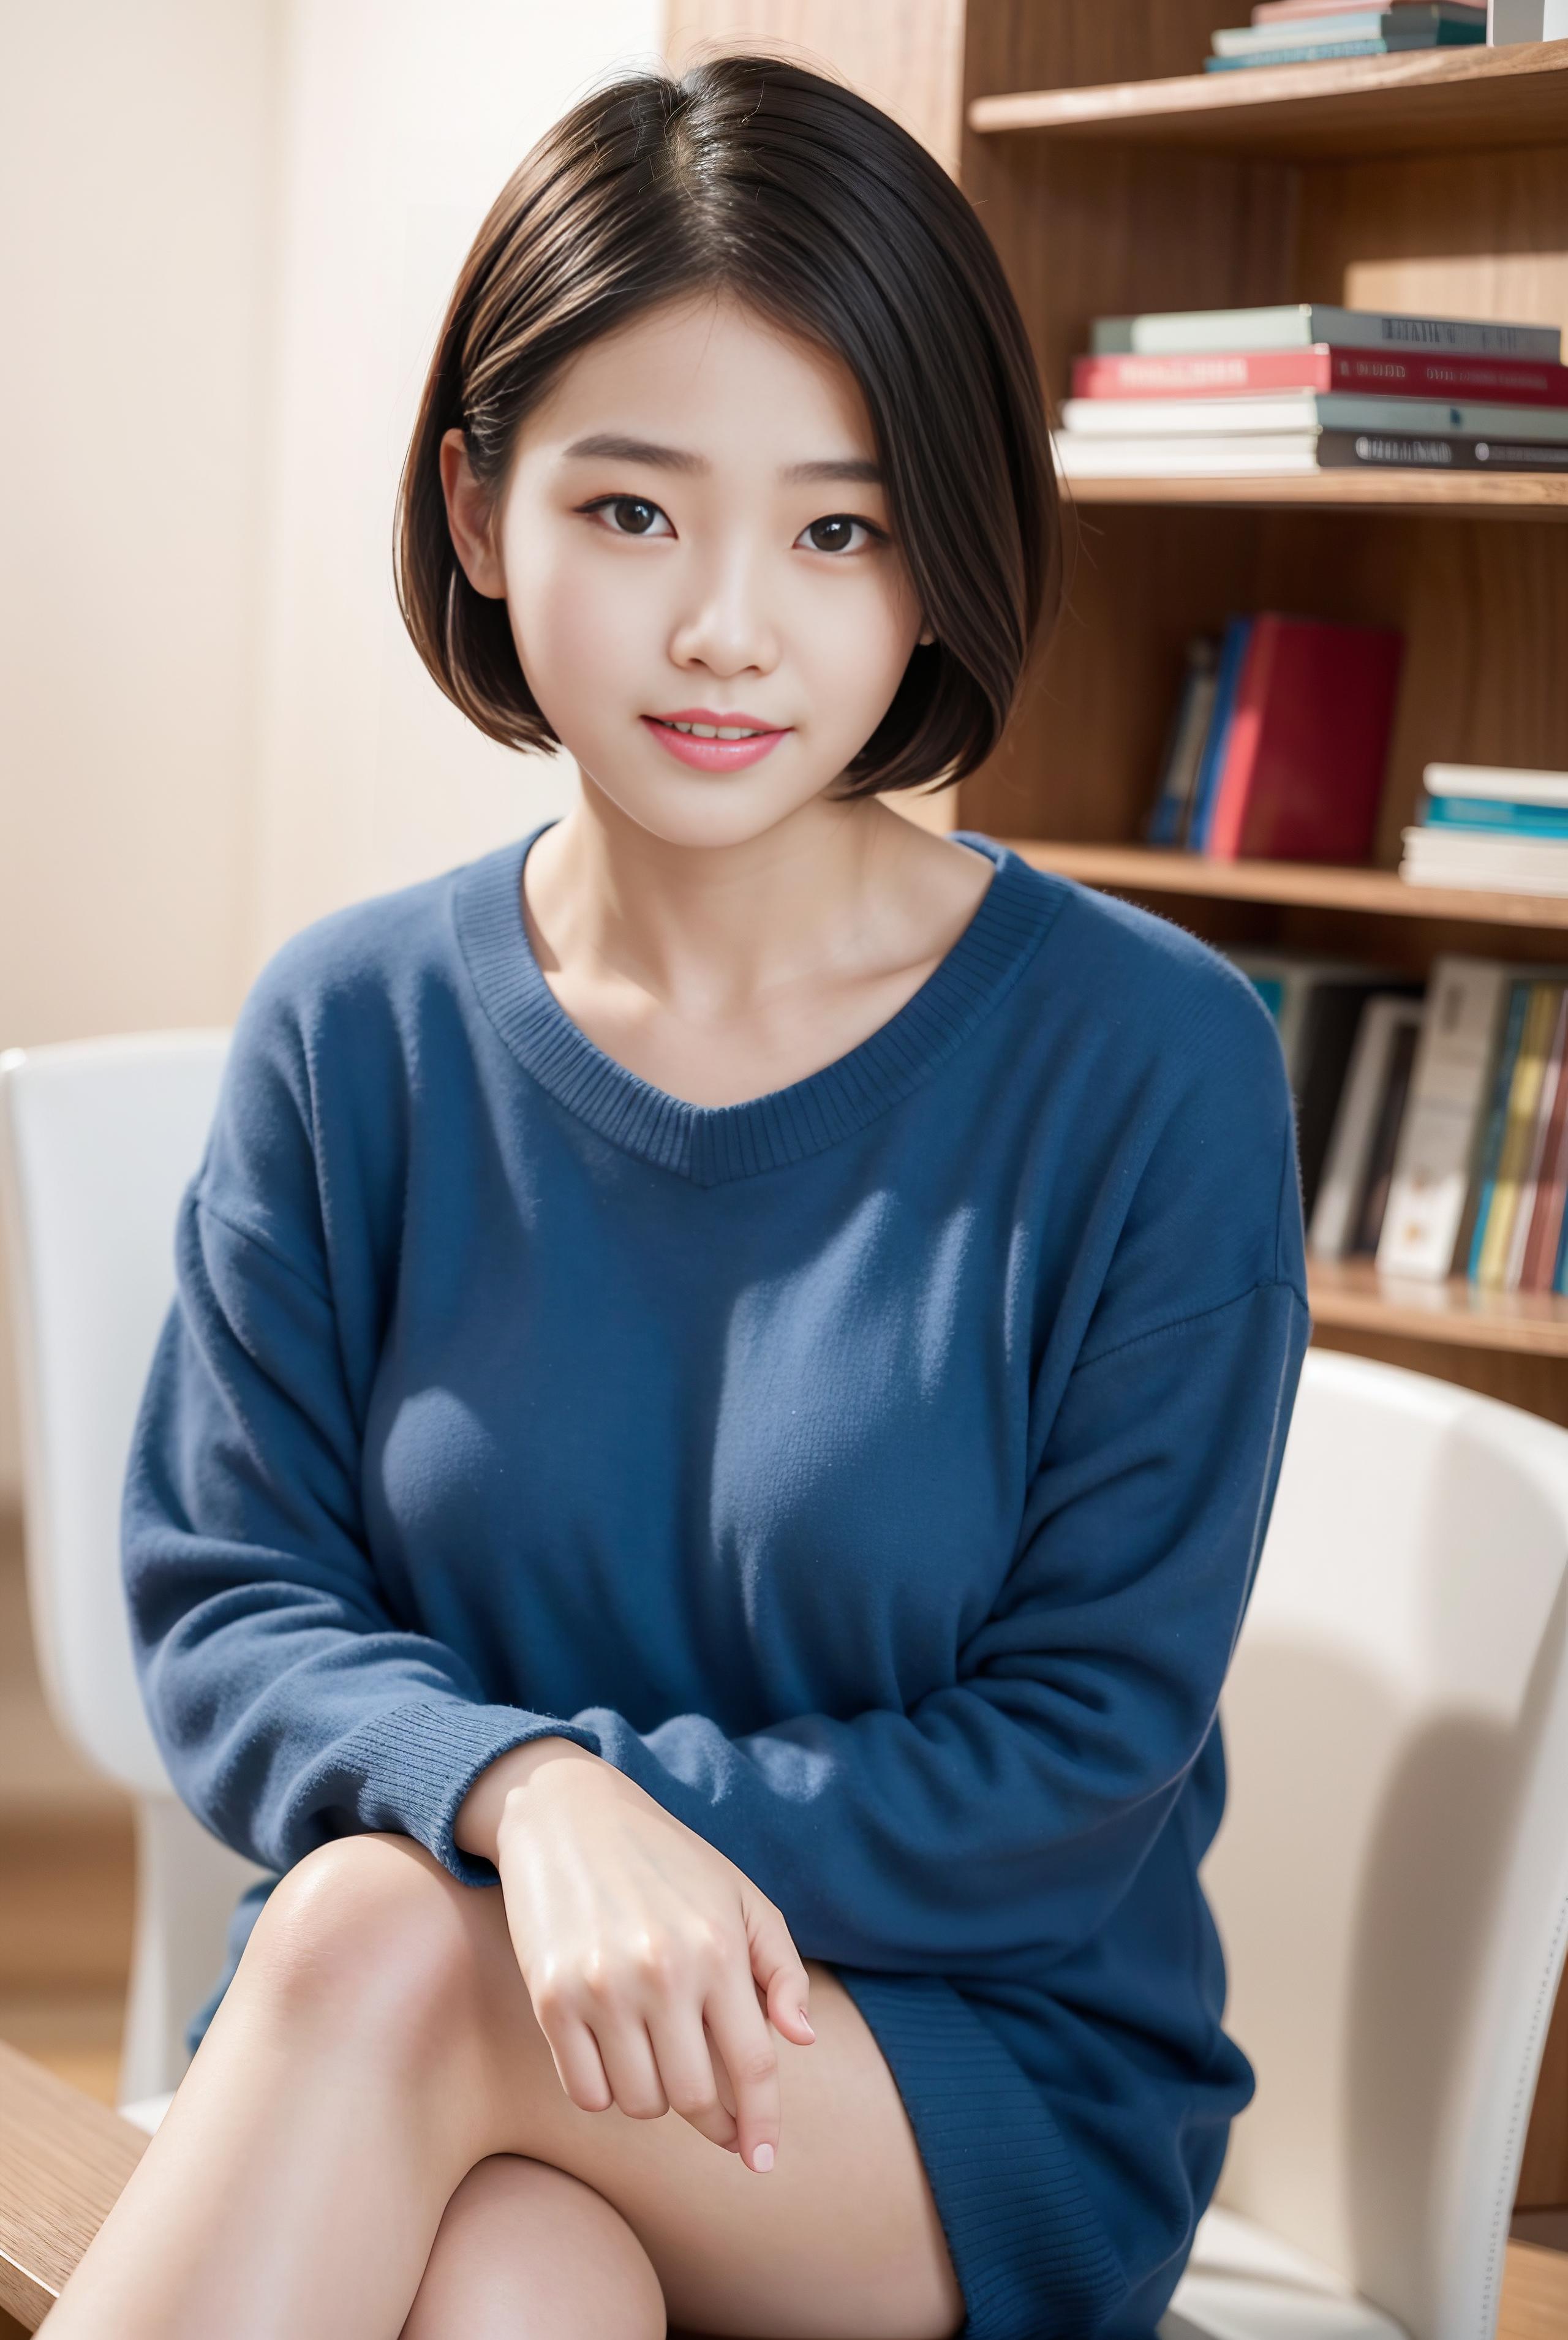 Normal Korean girl face, Chilloutmix base lora image by ko868